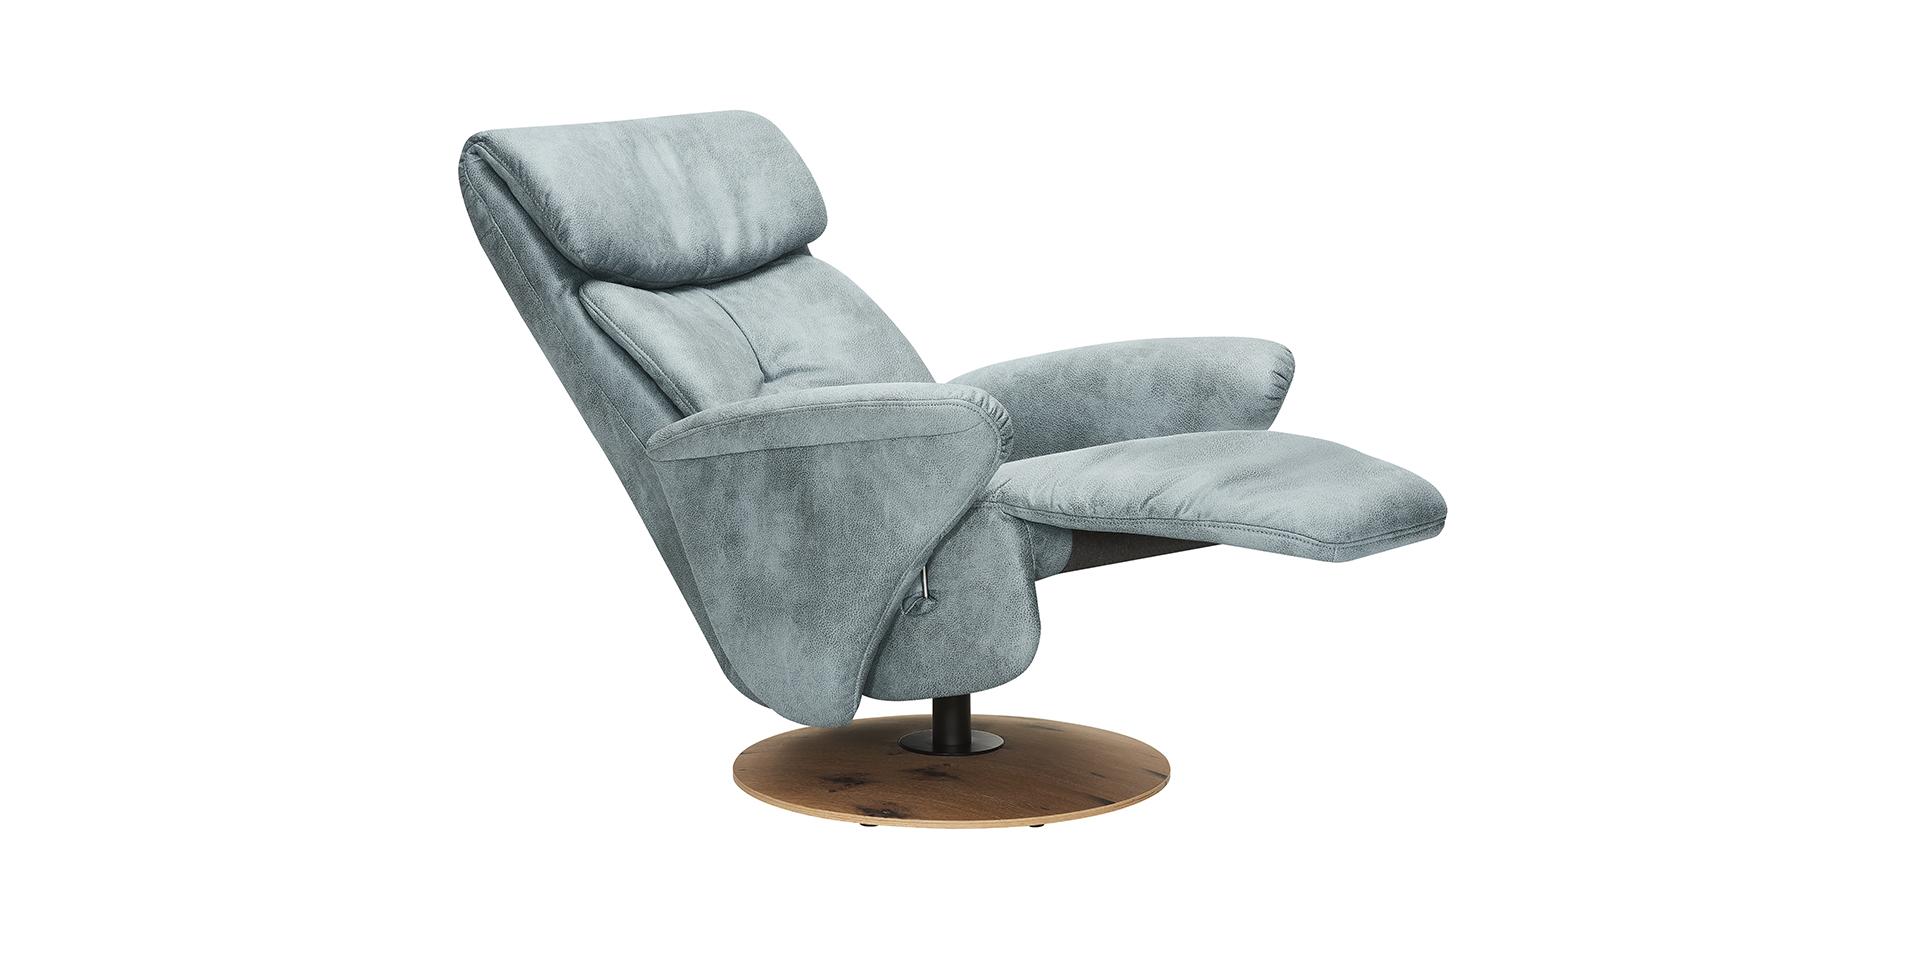 Slider Fauteuil relaxation 7341 (image 6)